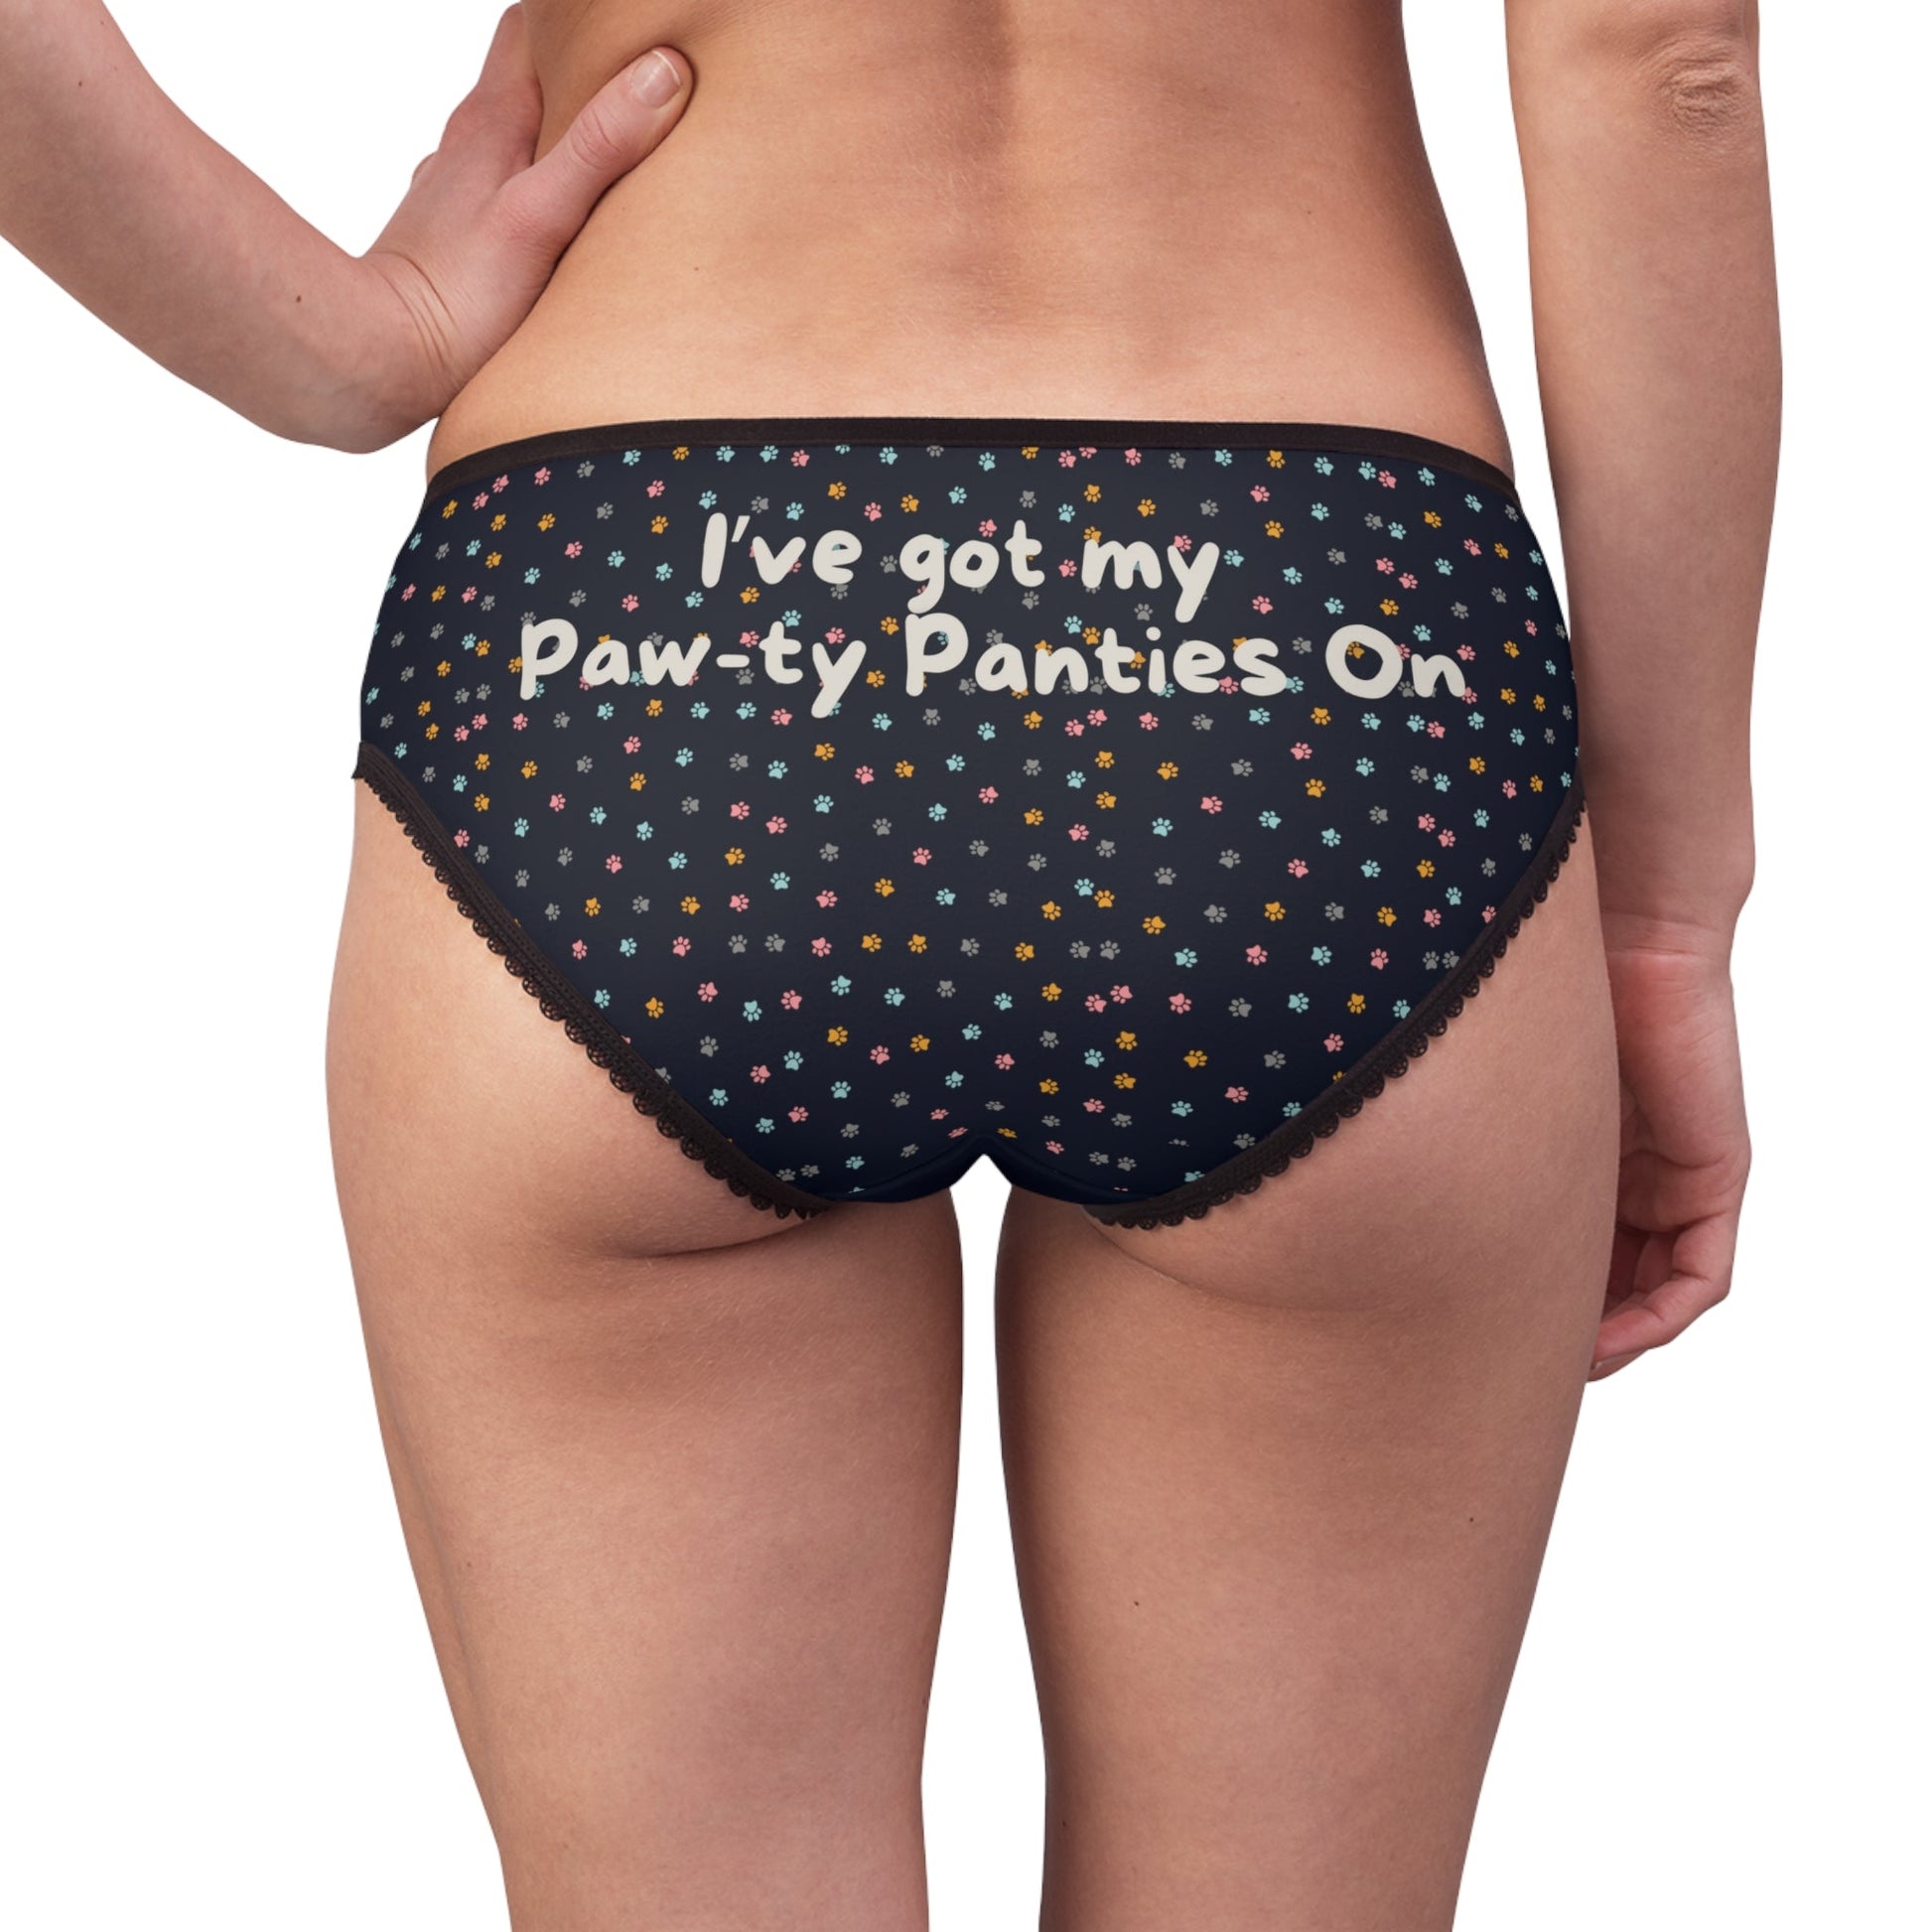 Paw - ty Panties - All Over Prints